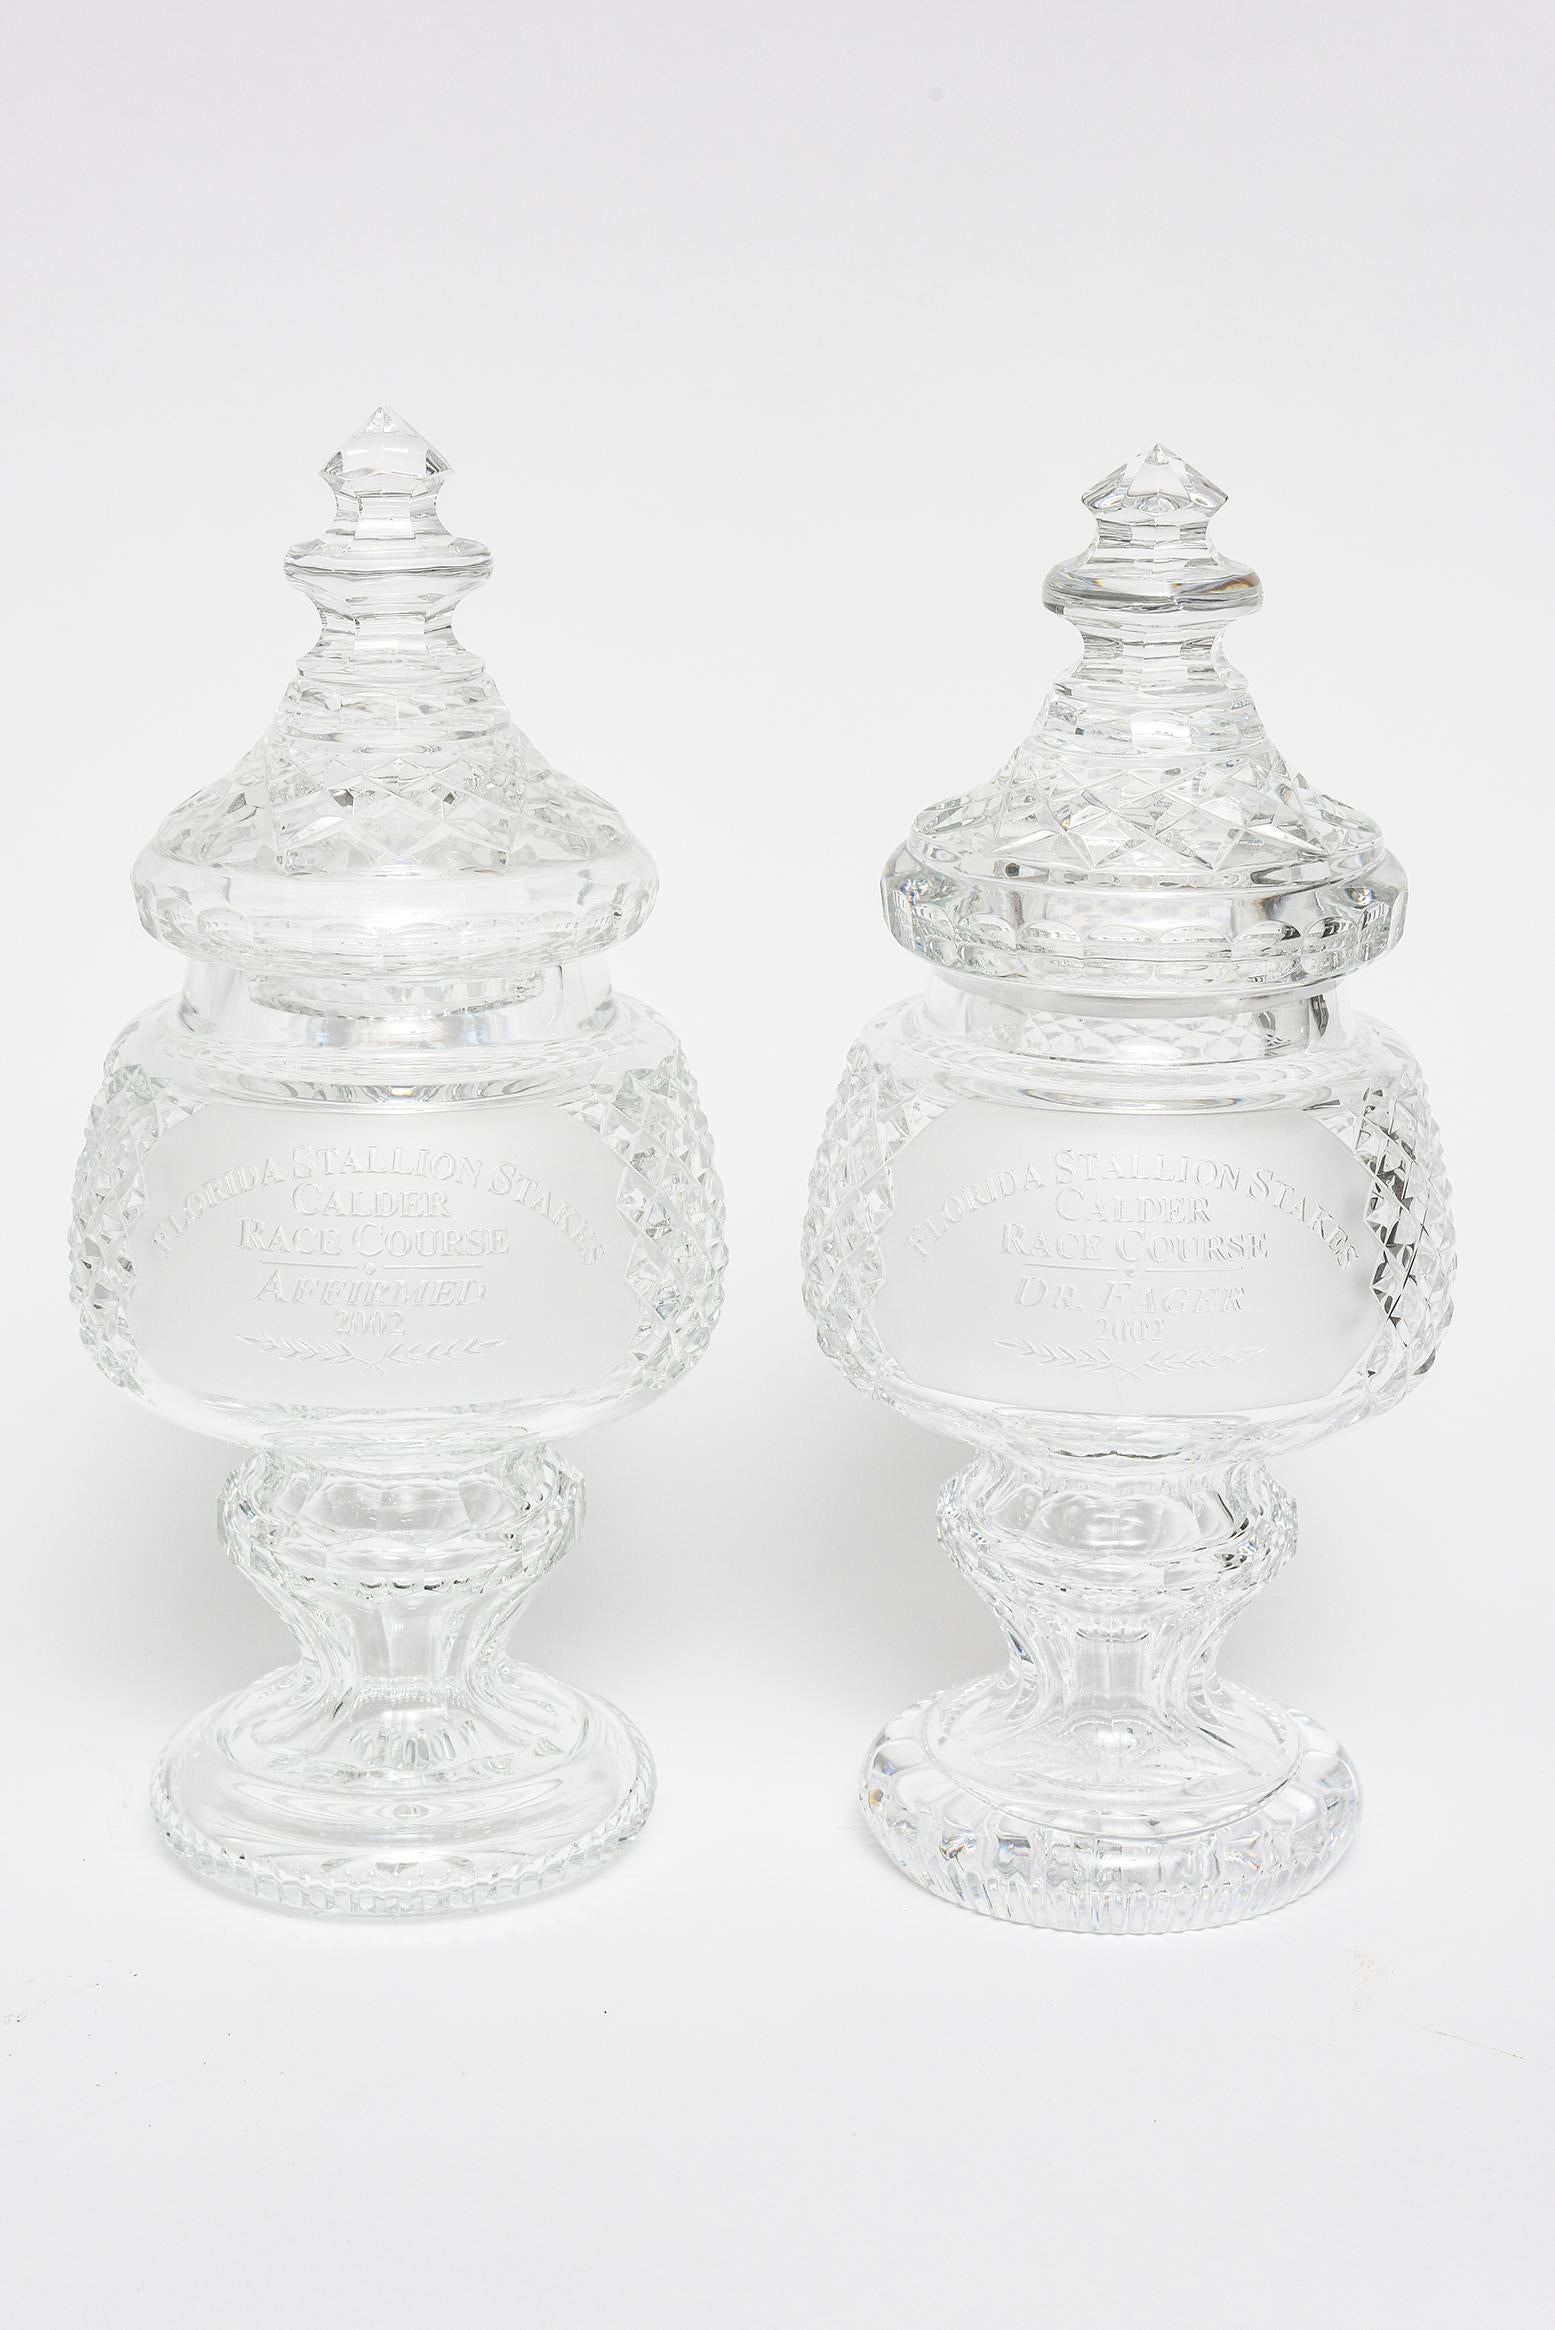 Group of 4 Waterford cut glass lead crystal horse racing trophies.
The group included one tall jar, a vase and a pair of smaller jars.
All 4 pieces are signed Waterford on the bottom.

Tallest lidded jar or apothecary jar has an etched horse